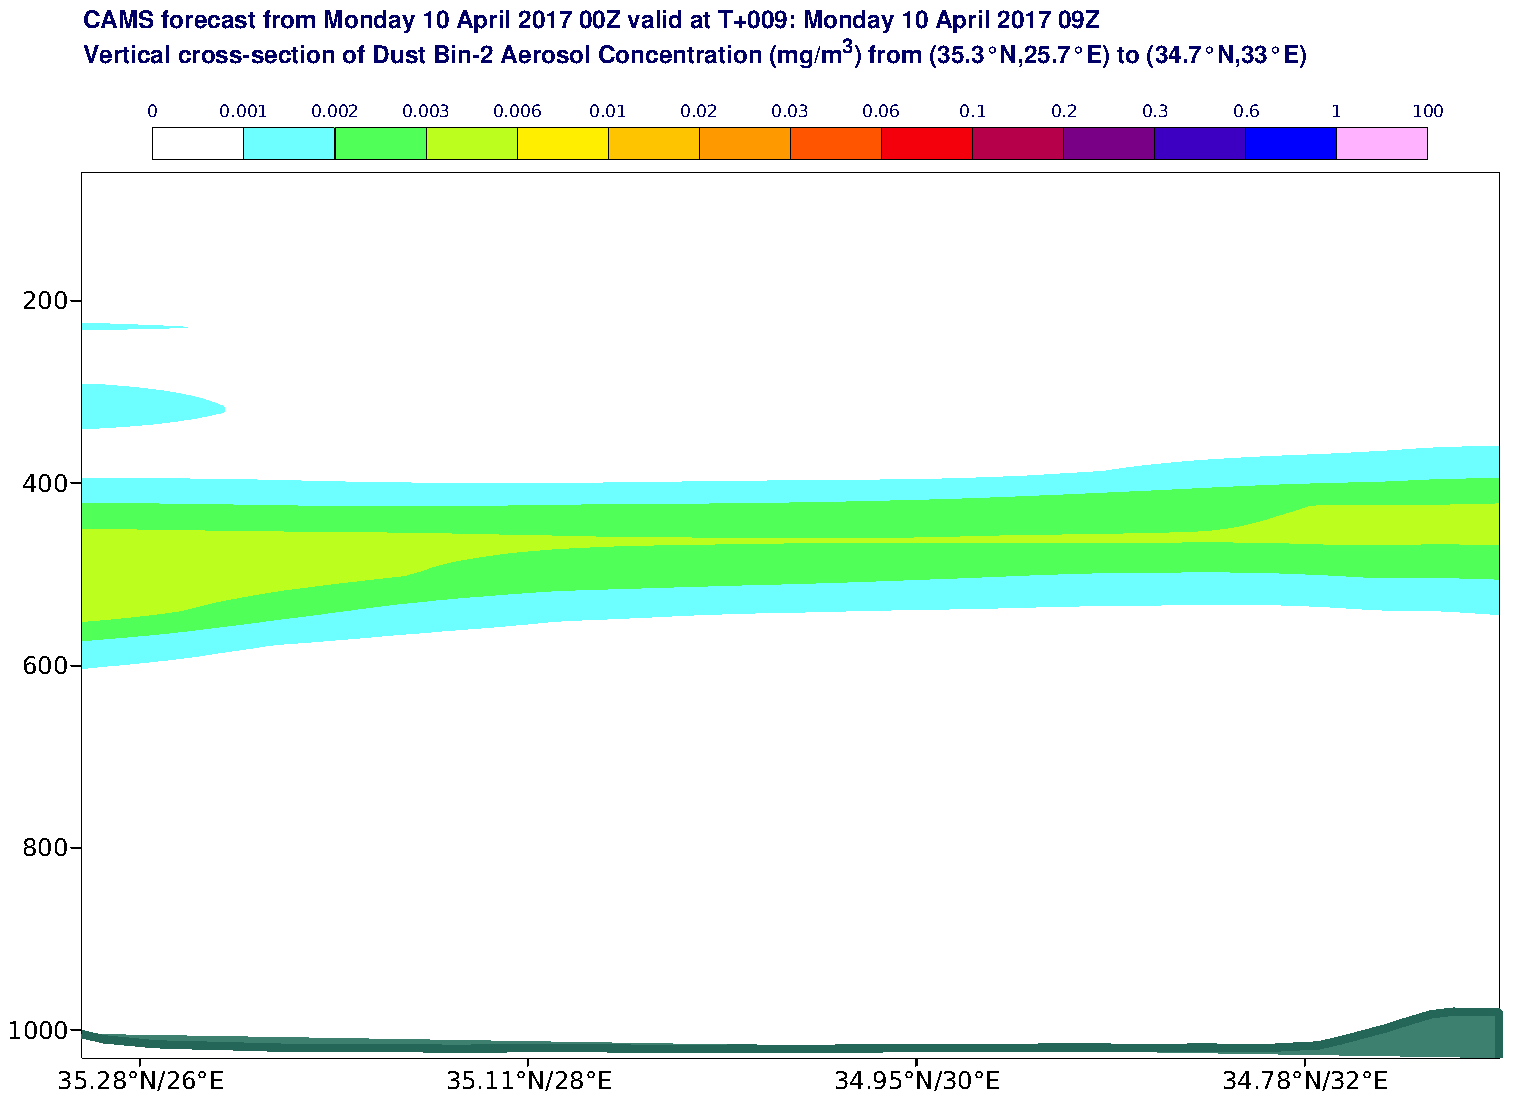 Vertical cross-section of Dust Bin-2 Aerosol Concentration (mg/m3) valid at T9 - 2017-04-10 09:00